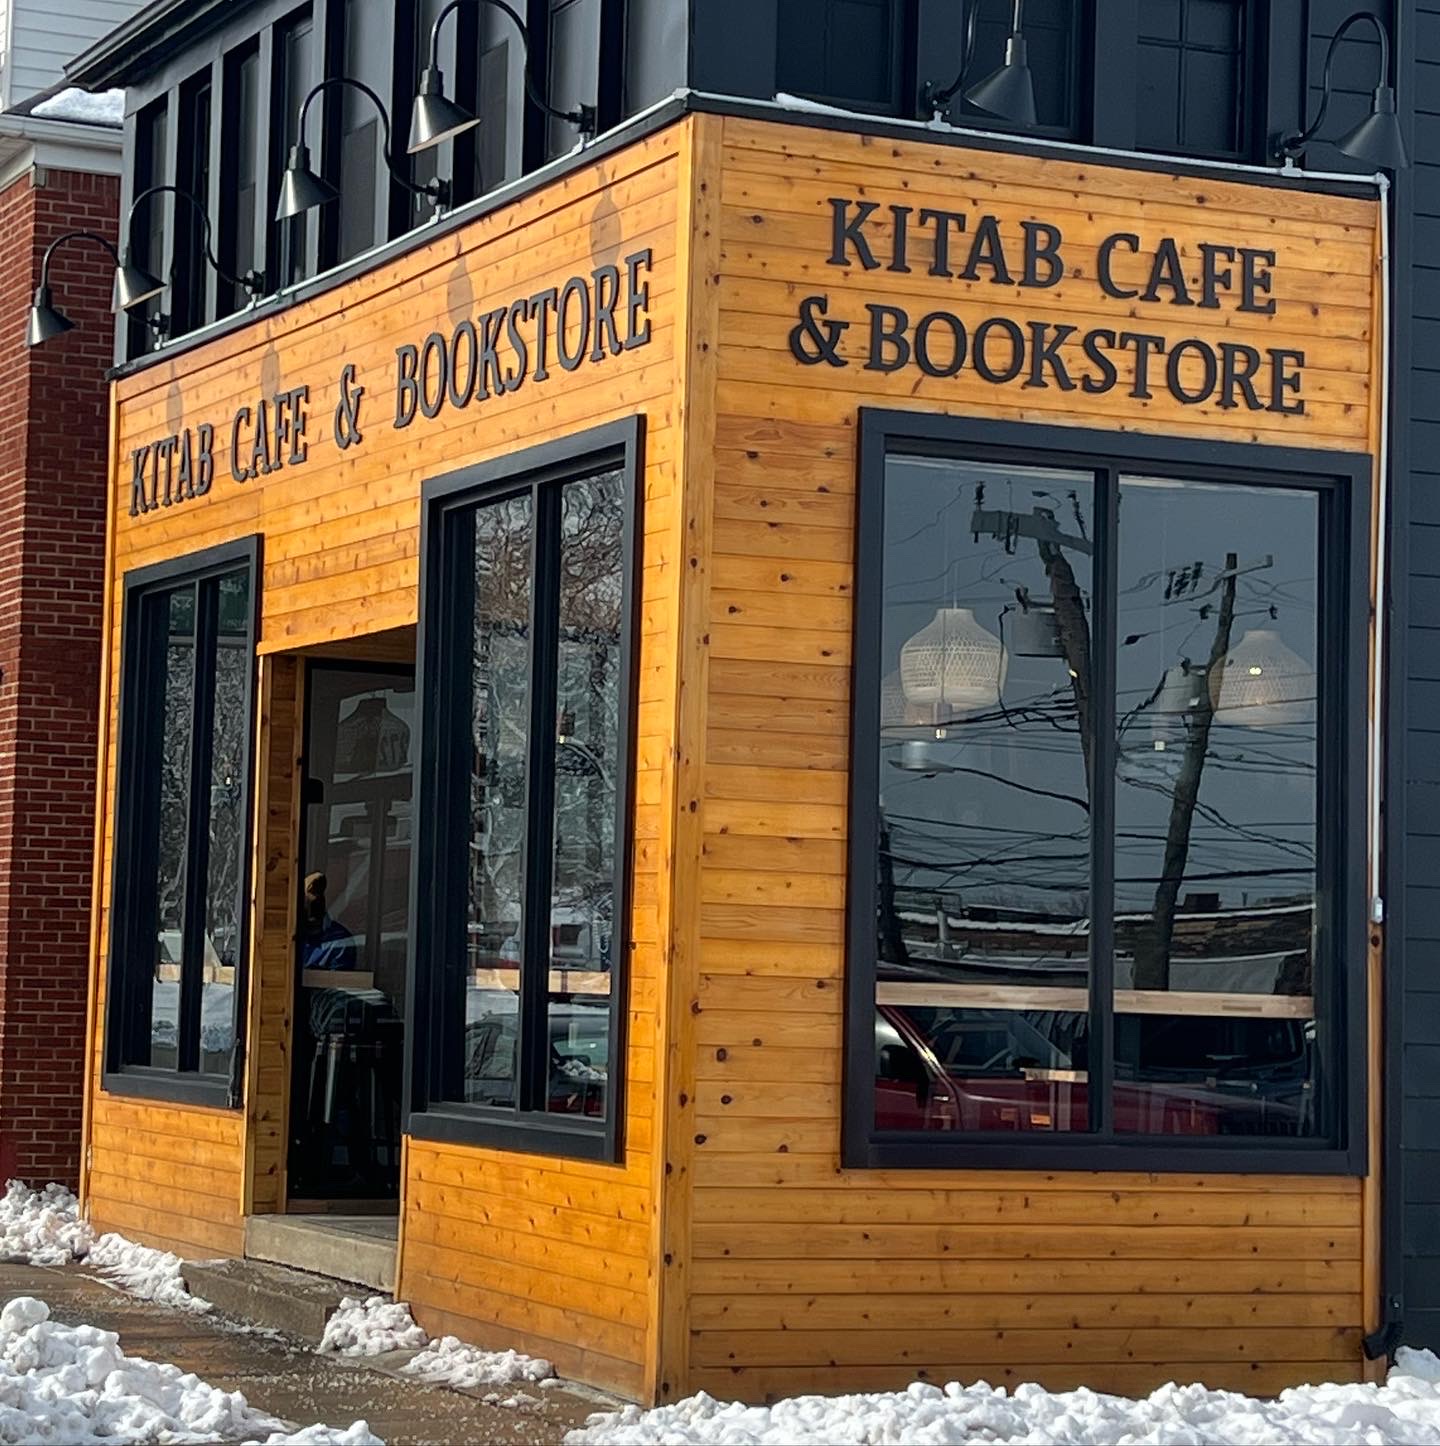 Kitab Cafe and Bookstore